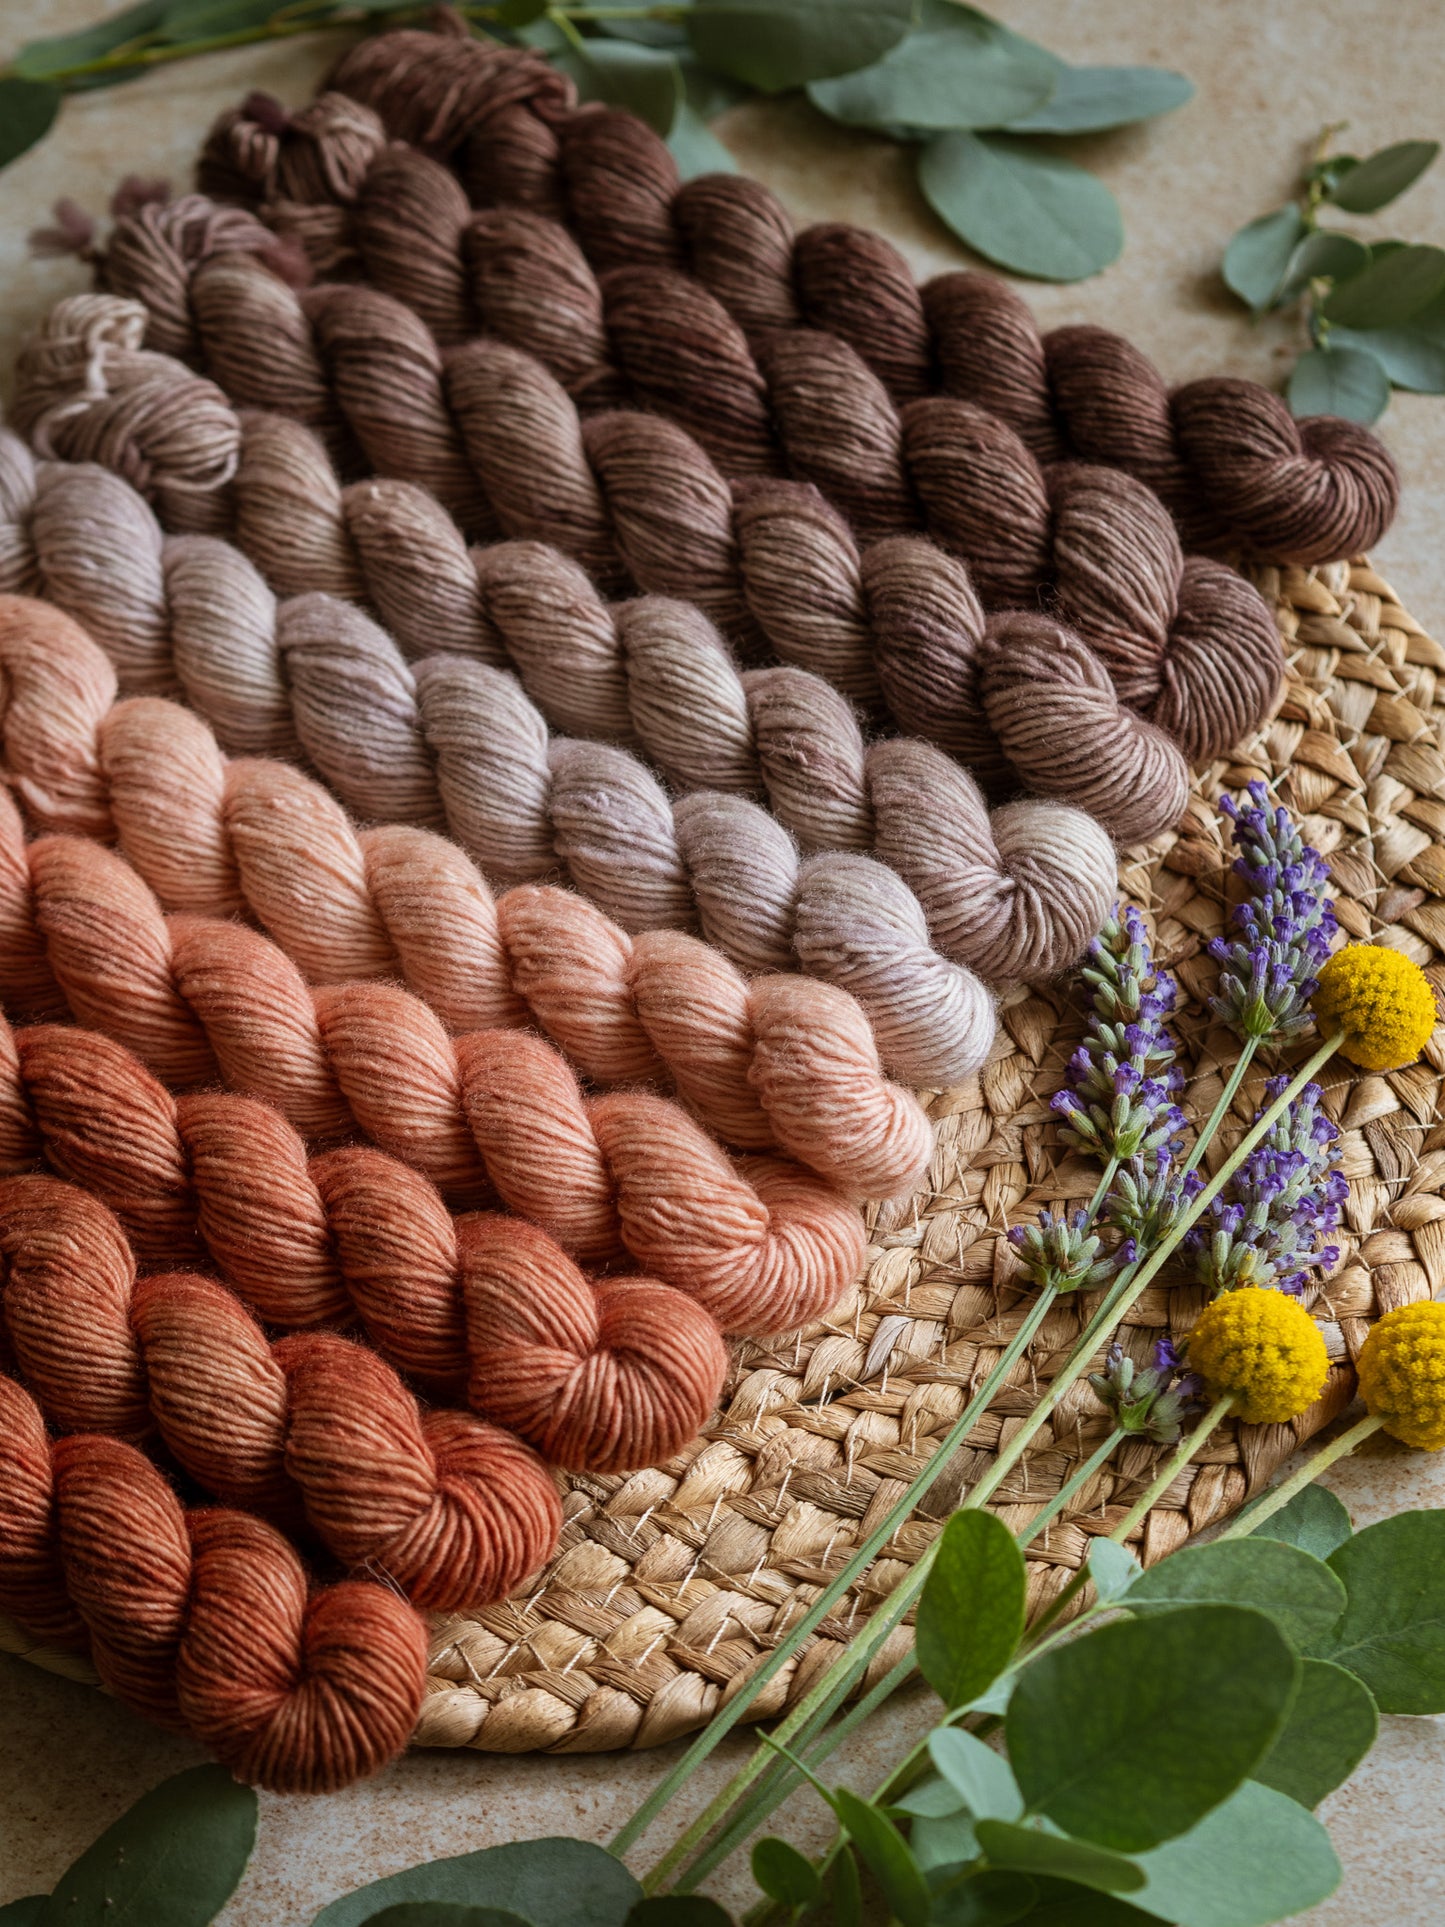 Paprika fade - The Gradient collection - 5 mini skeins